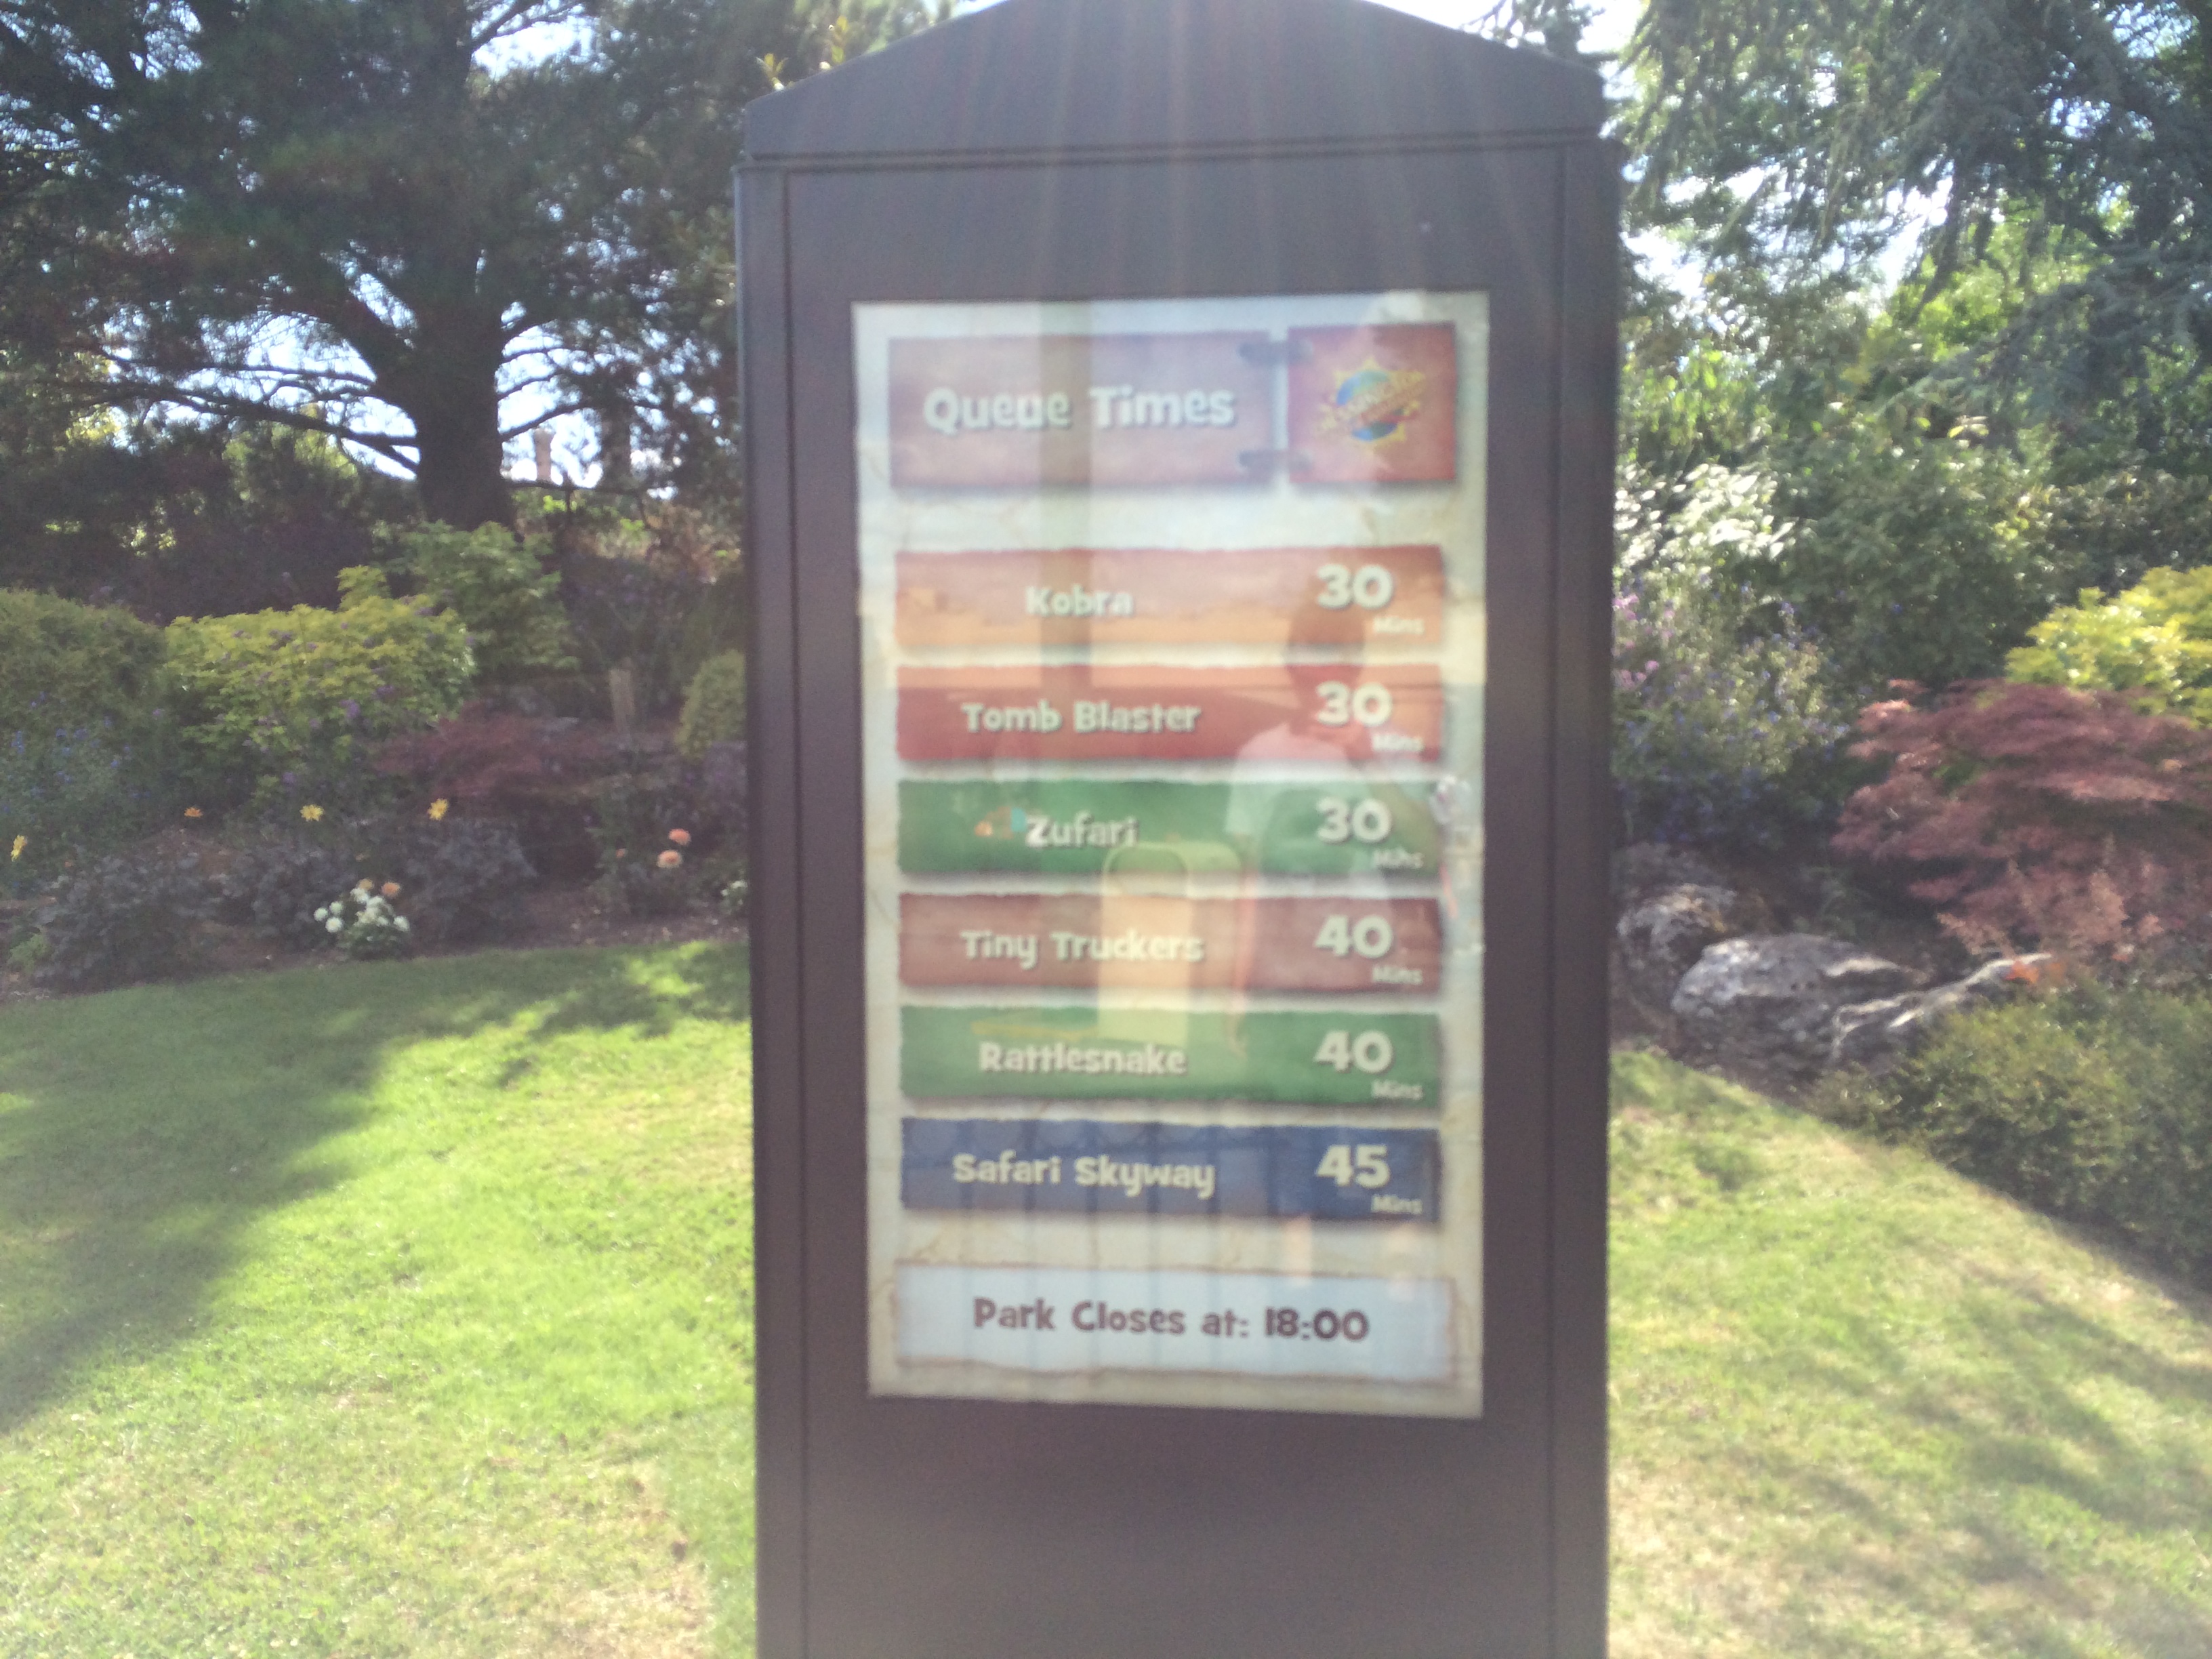 Chessington install new queue time boards